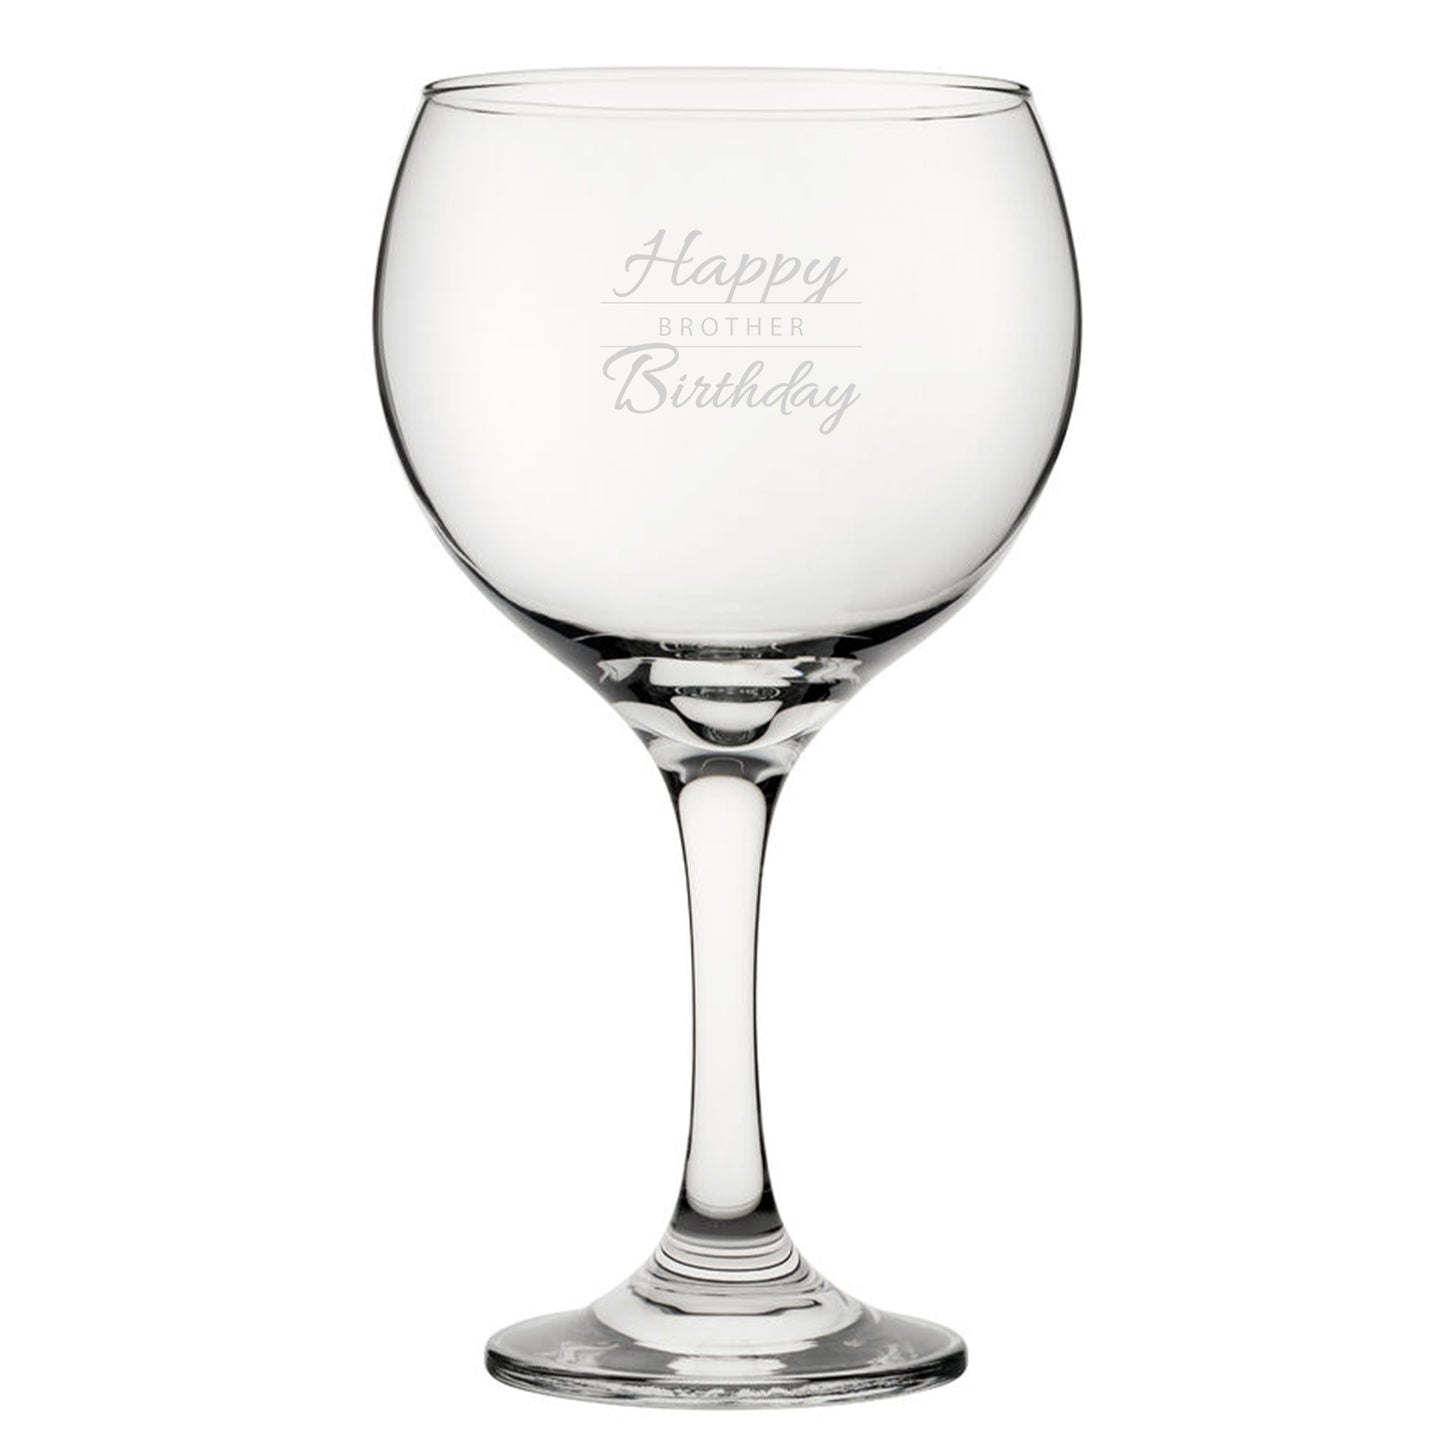 Happy Birthday Brother Modern Design - Engraved Novelty Gin Balloon Cocktail Glass Image 2